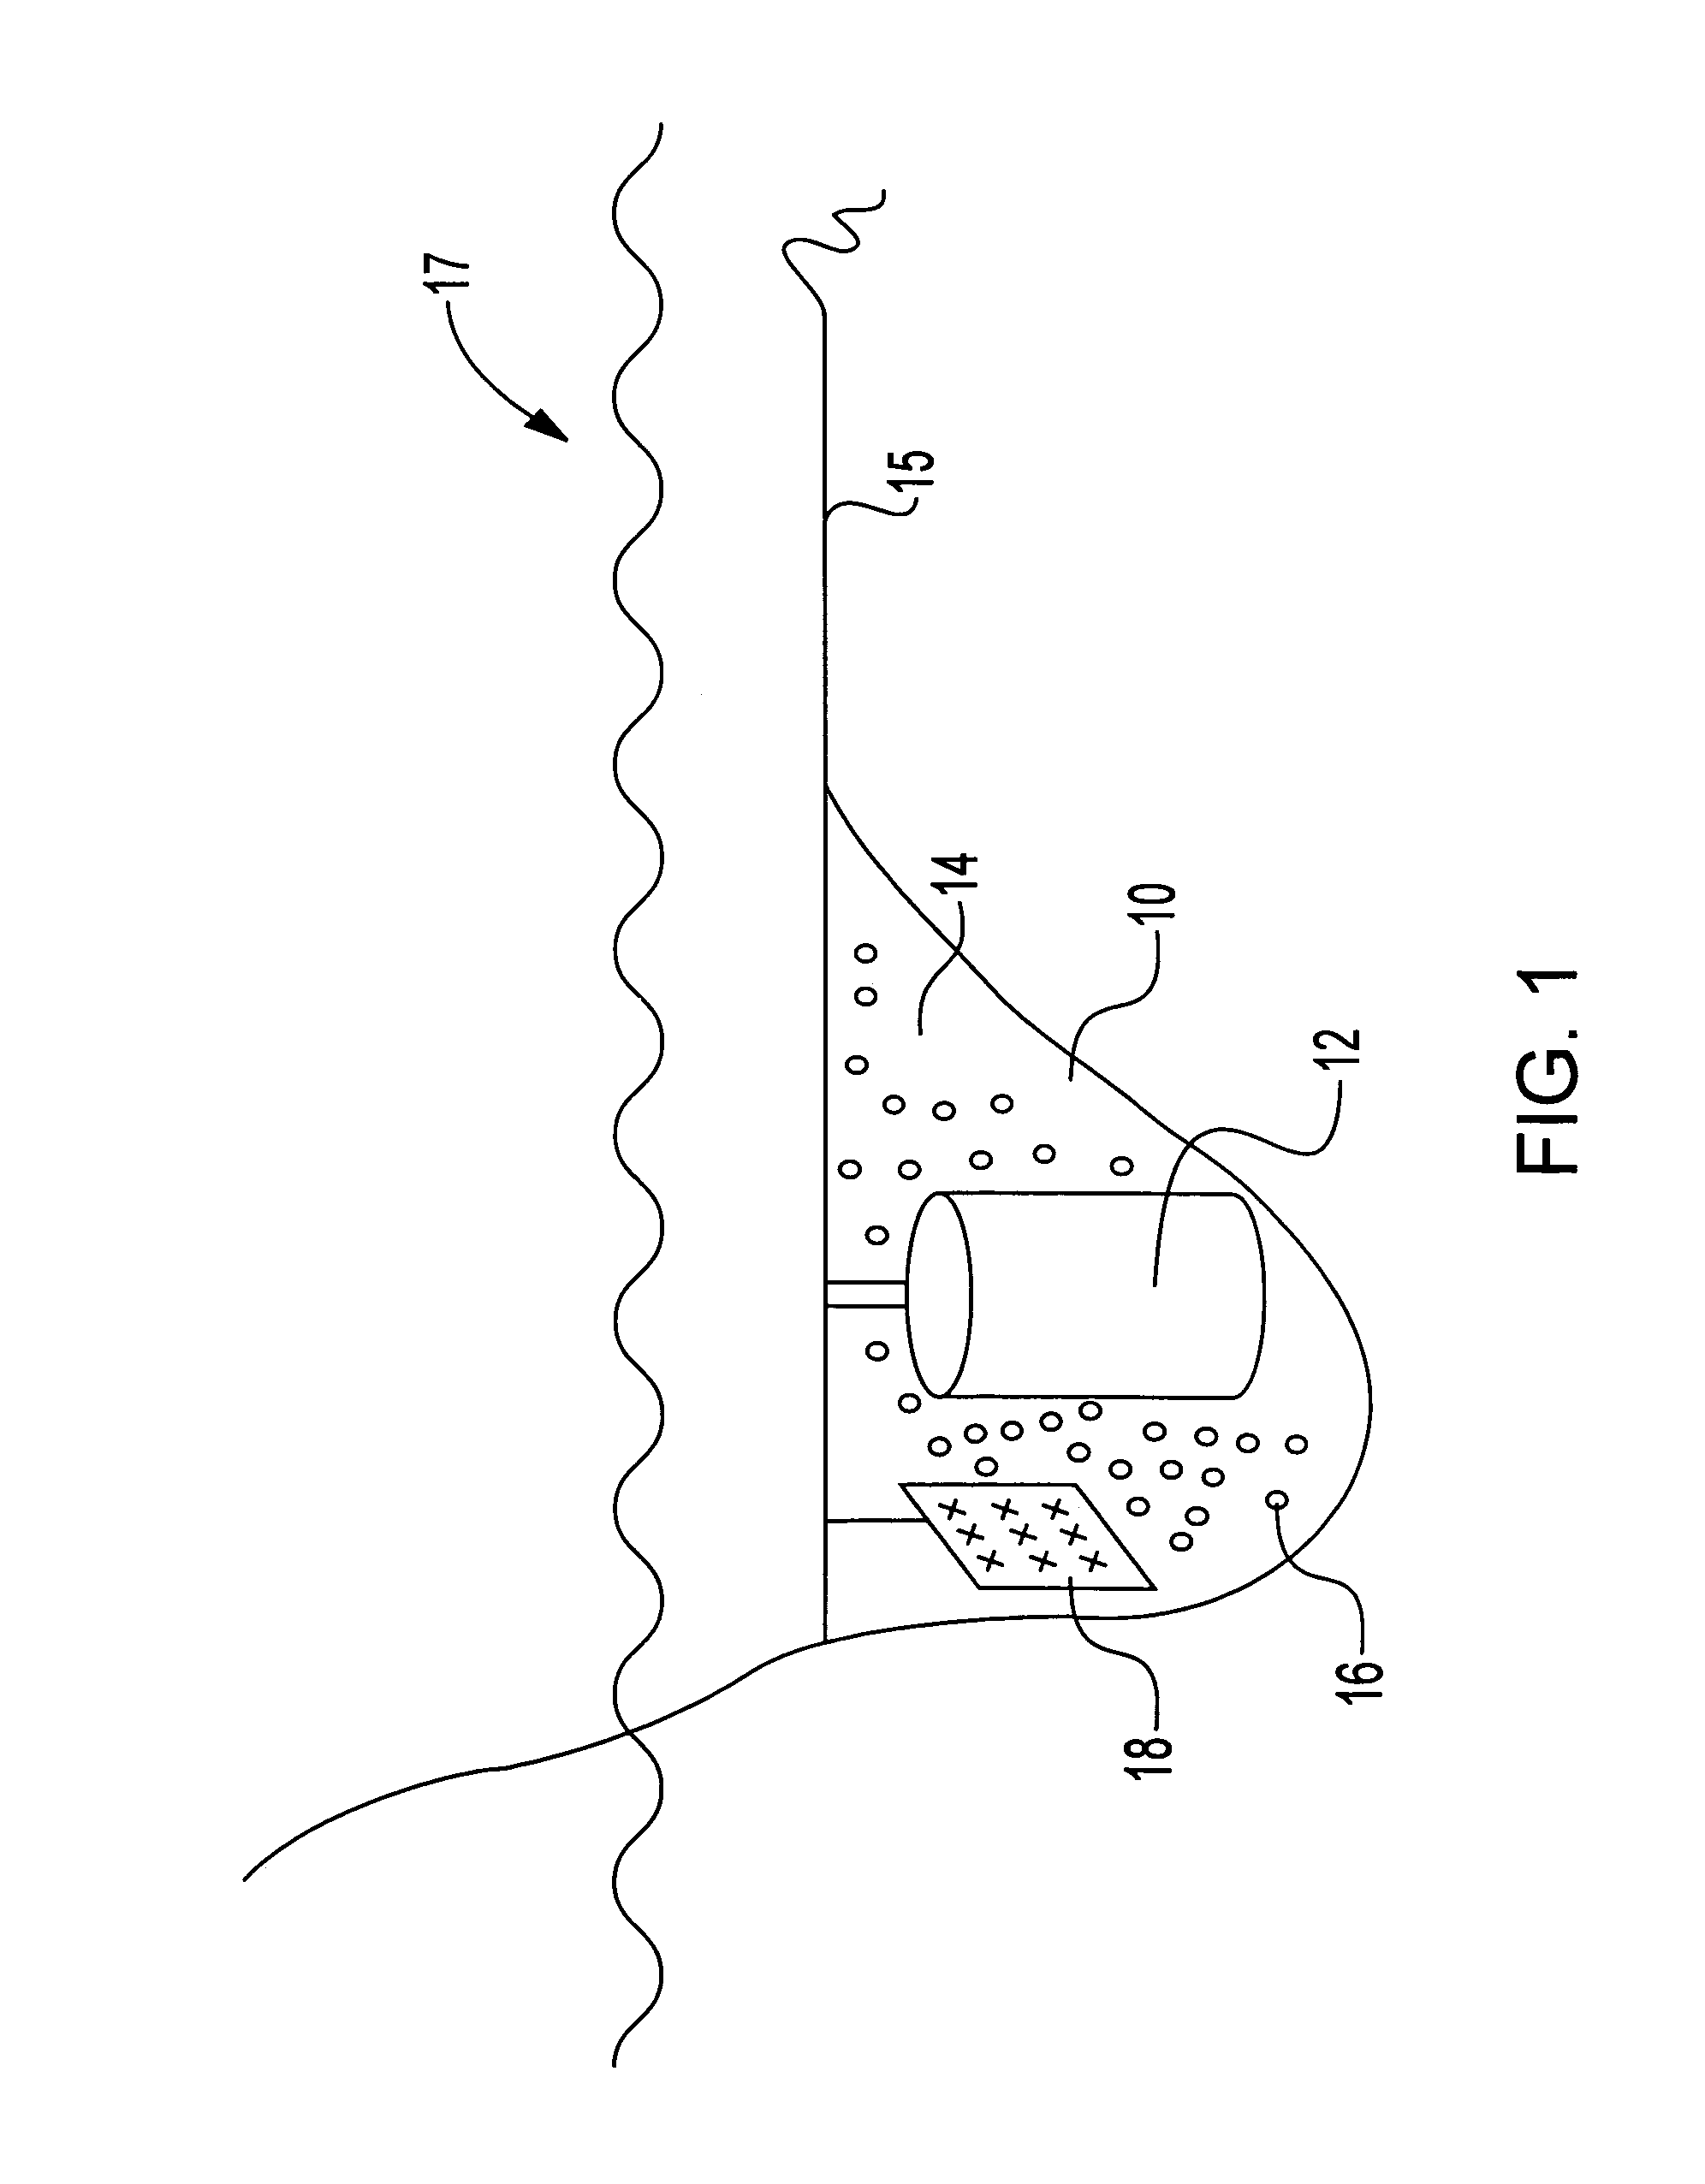 Increased effective aperture for receive arrays